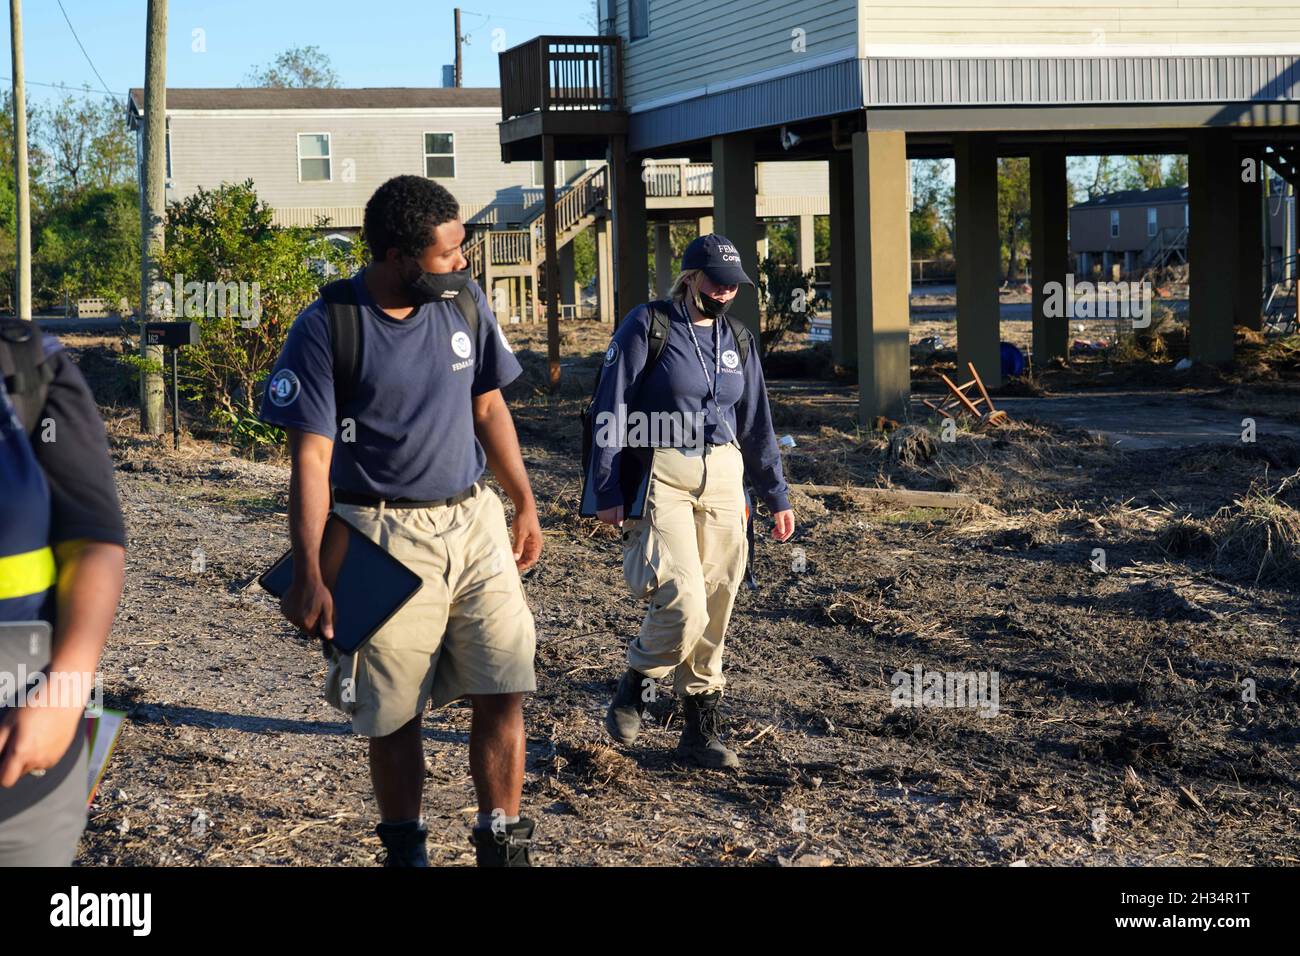 Ironton, United States of America. 24 September, 2021. FEMA Disaster Survivor Assistance staff walking door to door registering and answering questions for residents of the historically underserved communities in the aftermath of Hurricane Ida September 24, 2021 in Ironton, Louisiana. Credit: Julie Joseph/FEMA/Alamy Live News Stock Photo